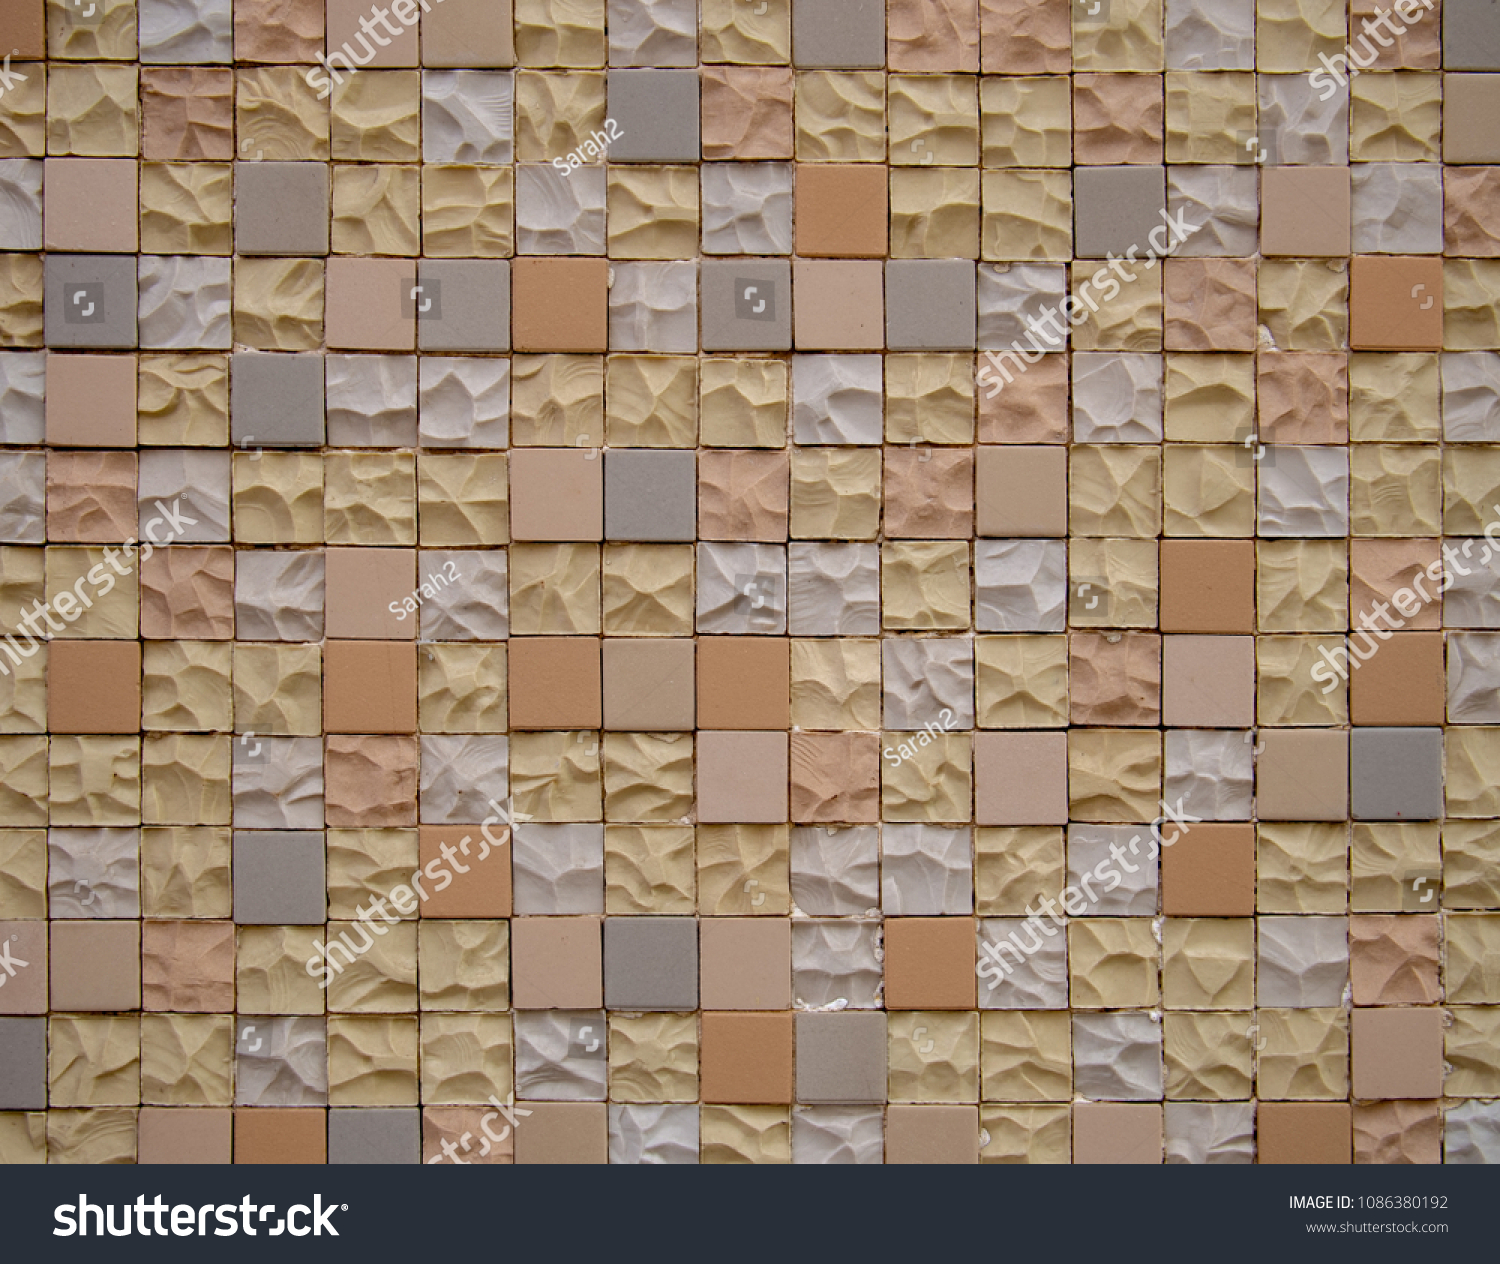 Tiles For Small House